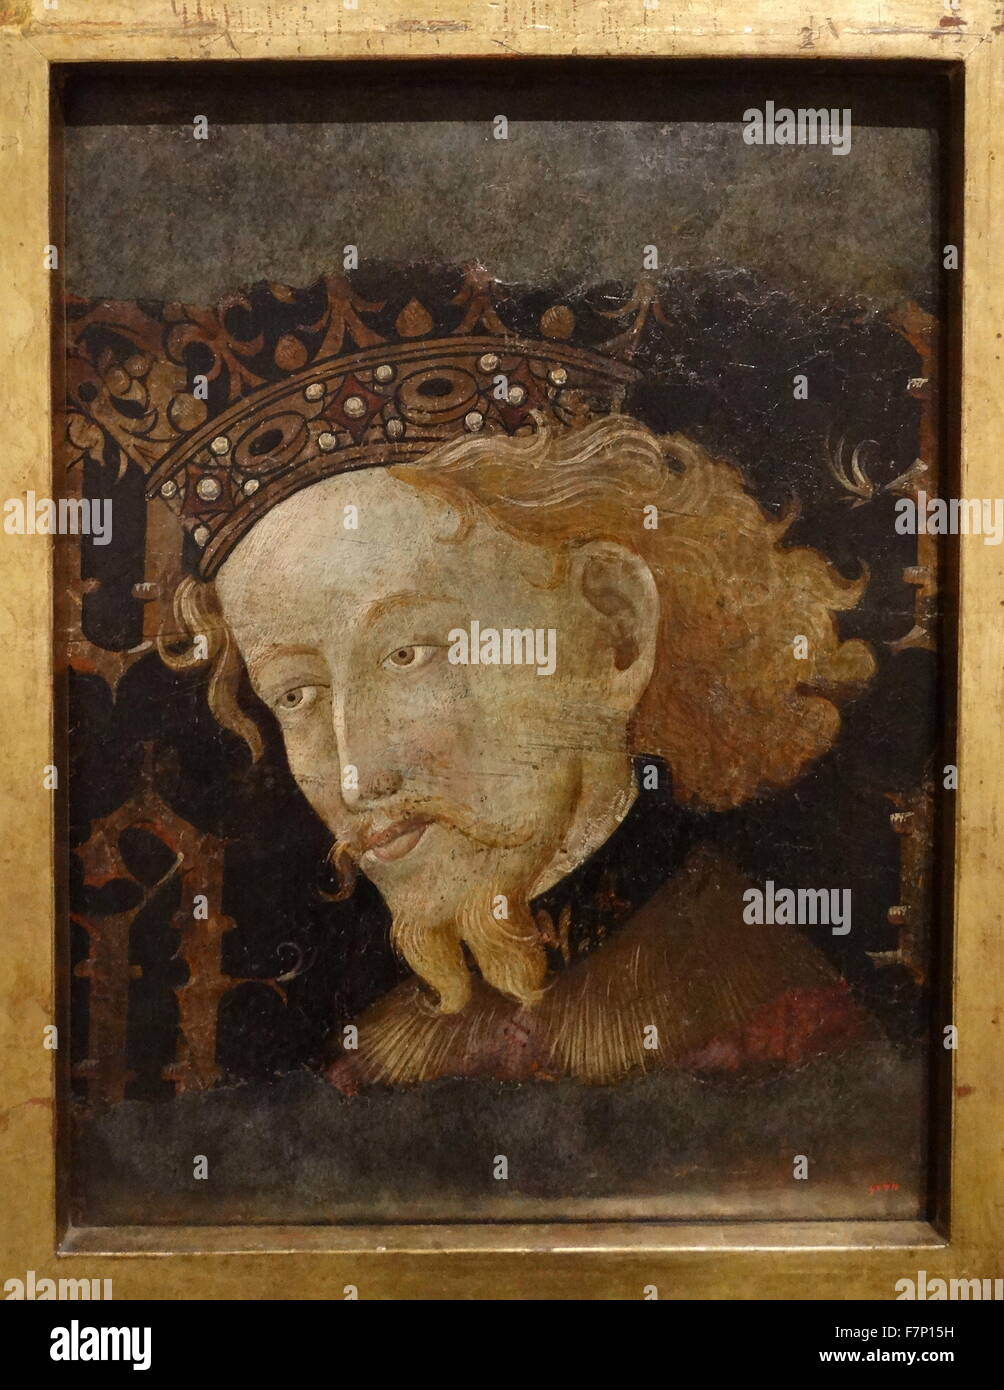 Portrait of Peter III, King of Aragon. By Gonzalo Pérez and Jaume Mateu, Catalonian artists of the 15th Century Stock Photo